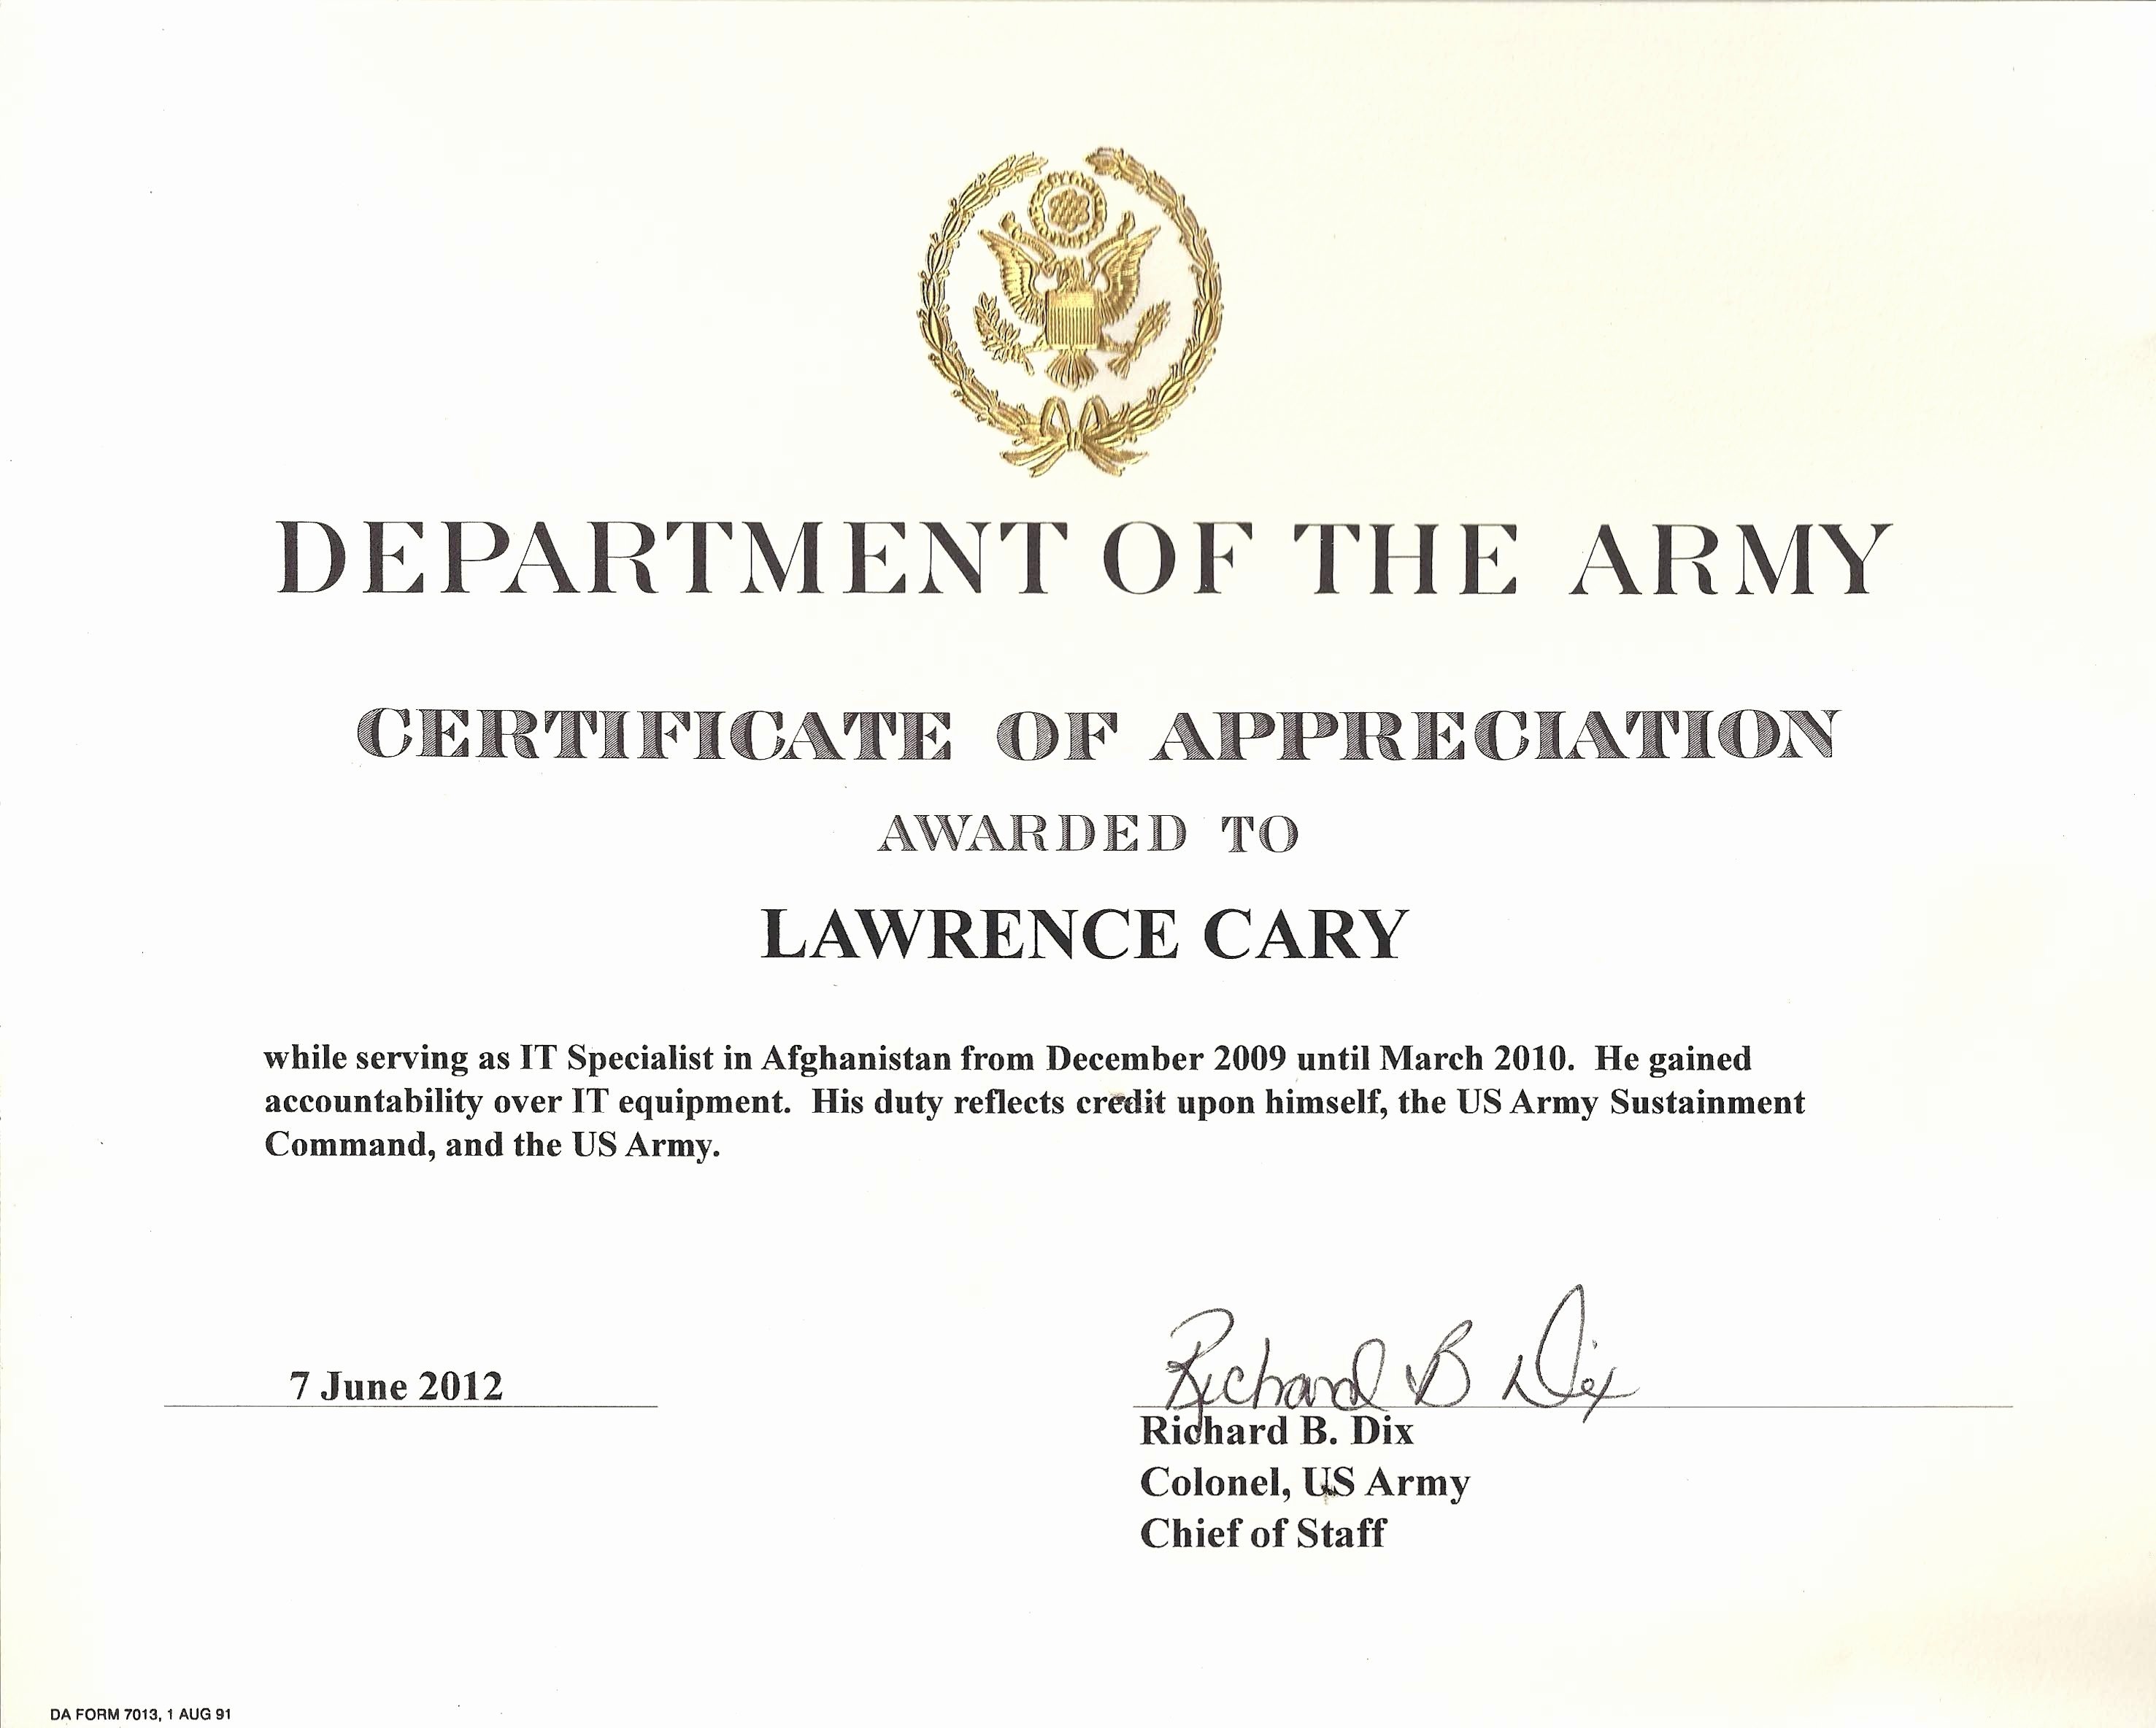 Army Award Certificate Template New Army Certificate Appreciation form Number